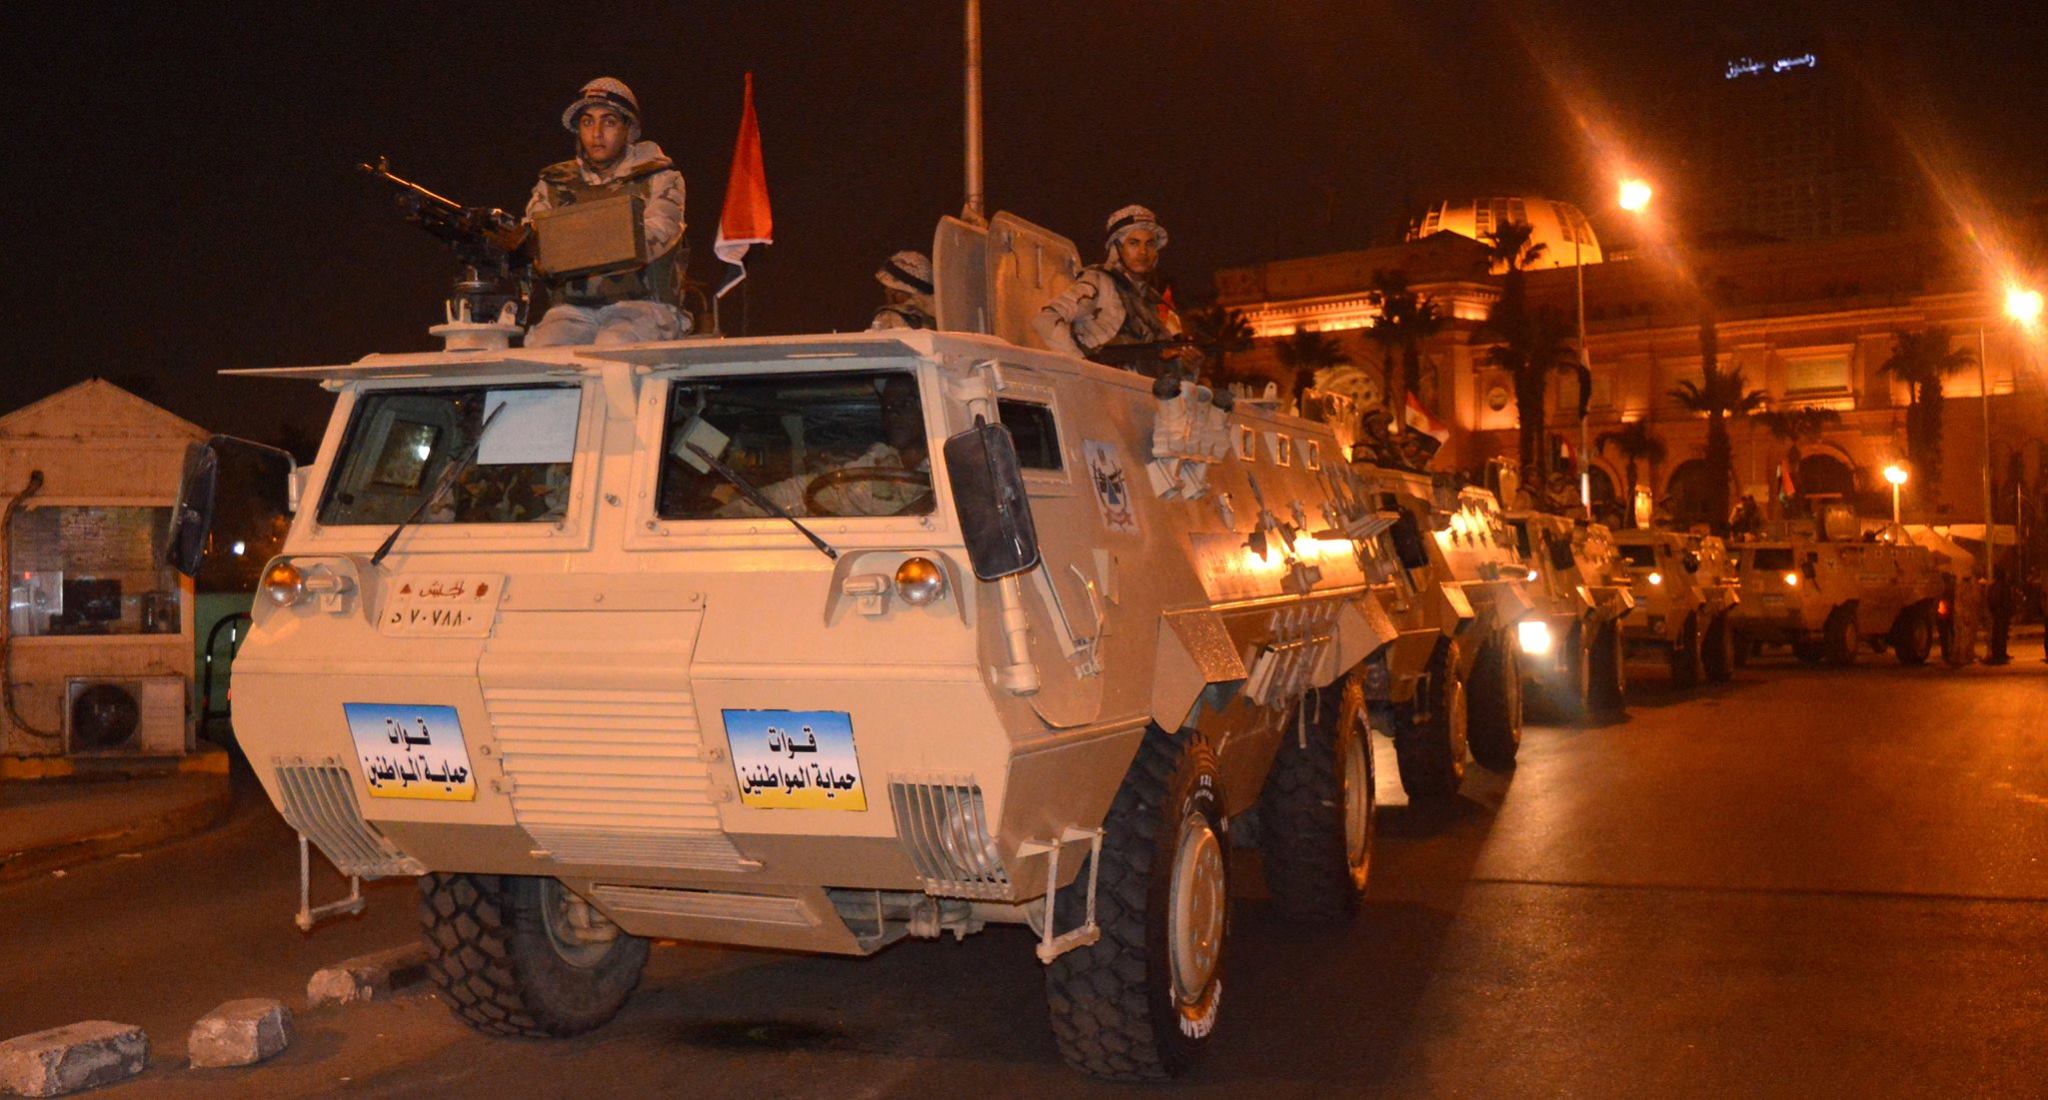 Egyptian military forces at Tahrir Square (photo provided by Military)